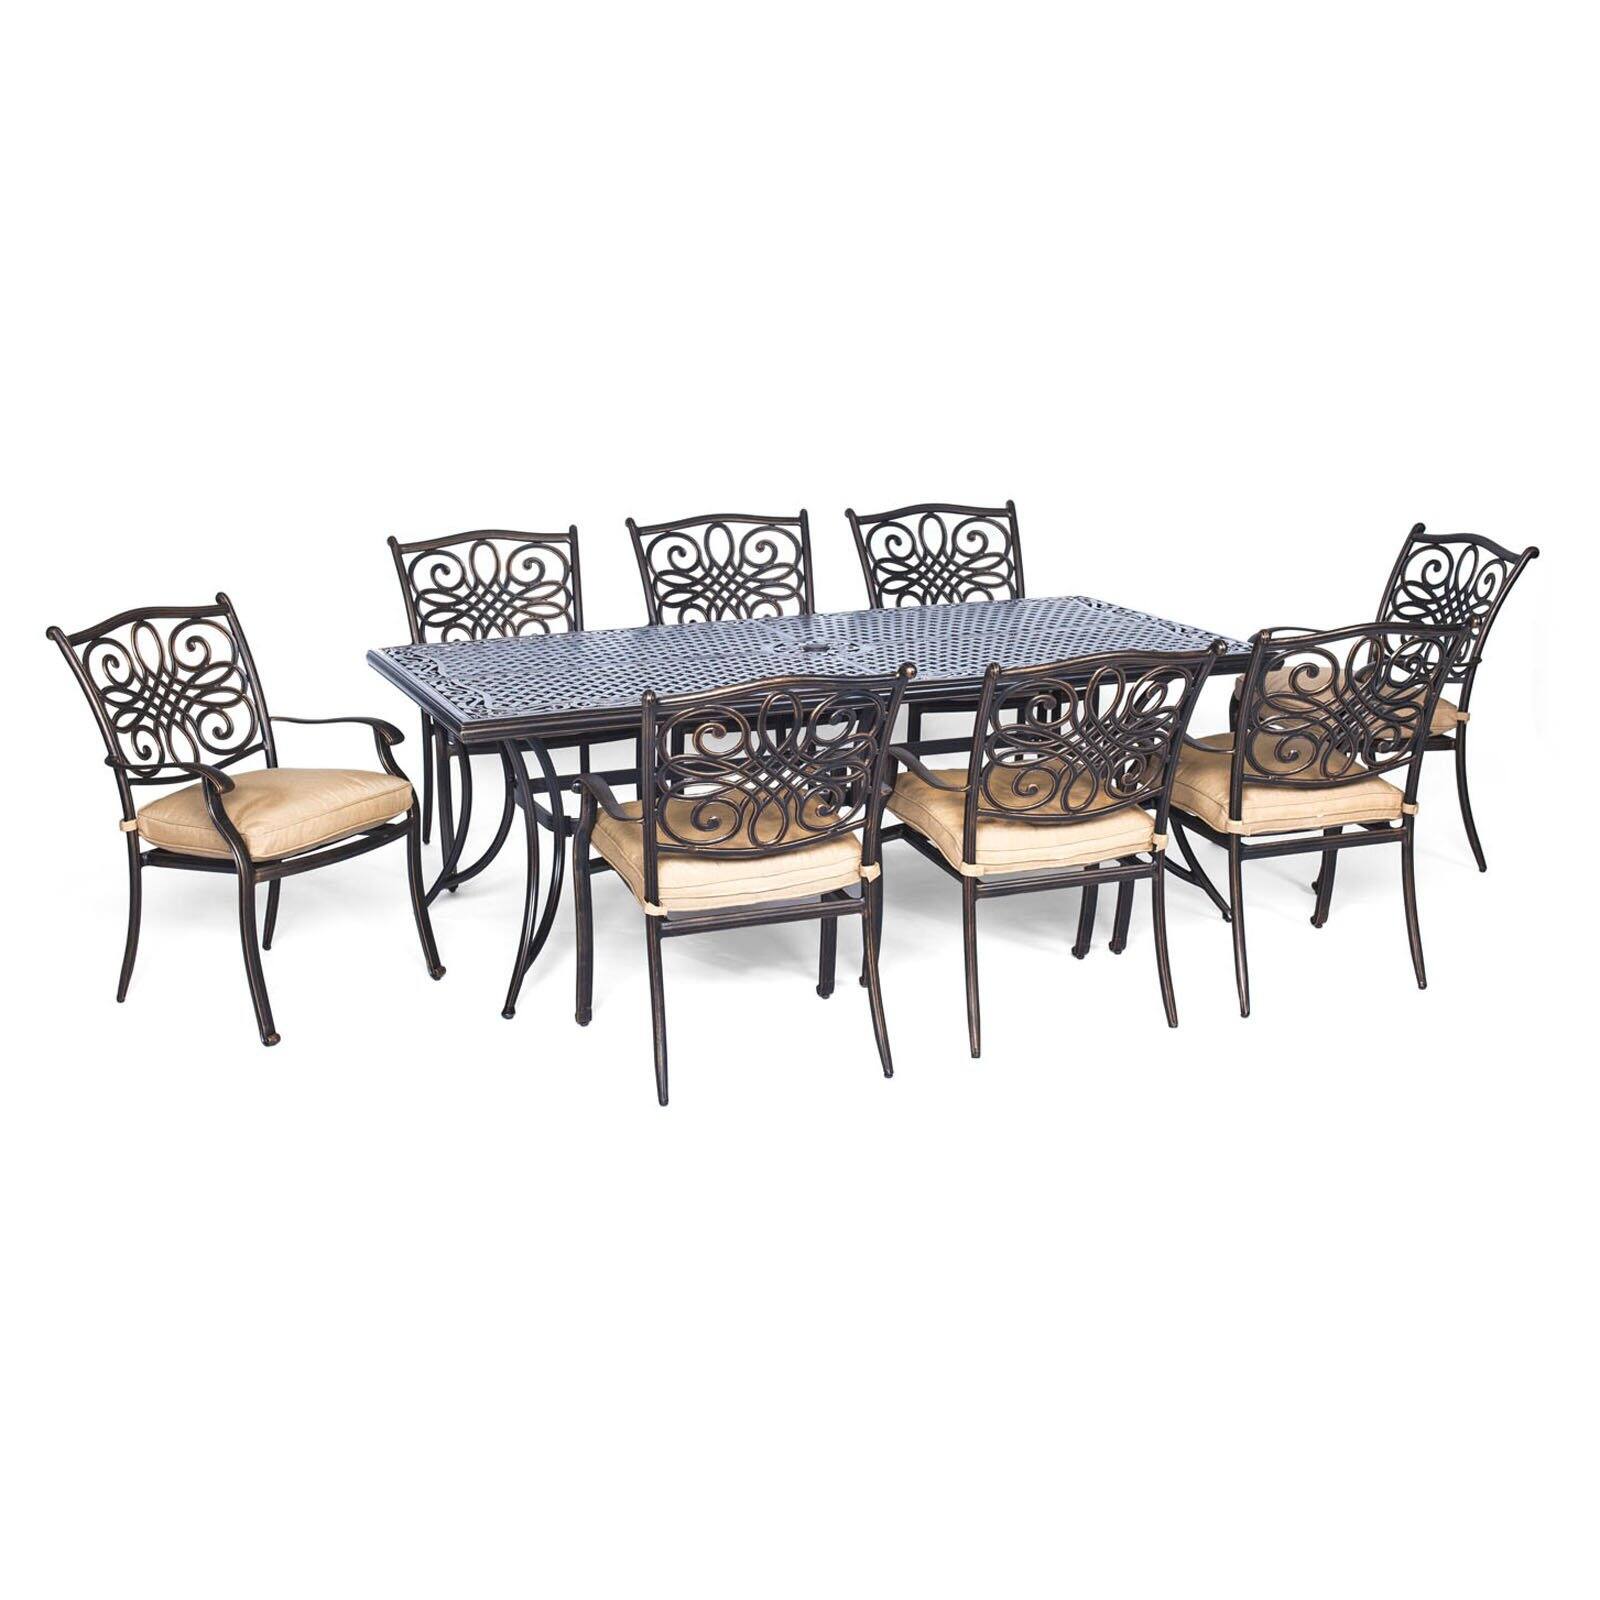 Hanover Traditions 9-Piece Aluminum Outdoor Dining Set, Natural Oat - image 1 of 17